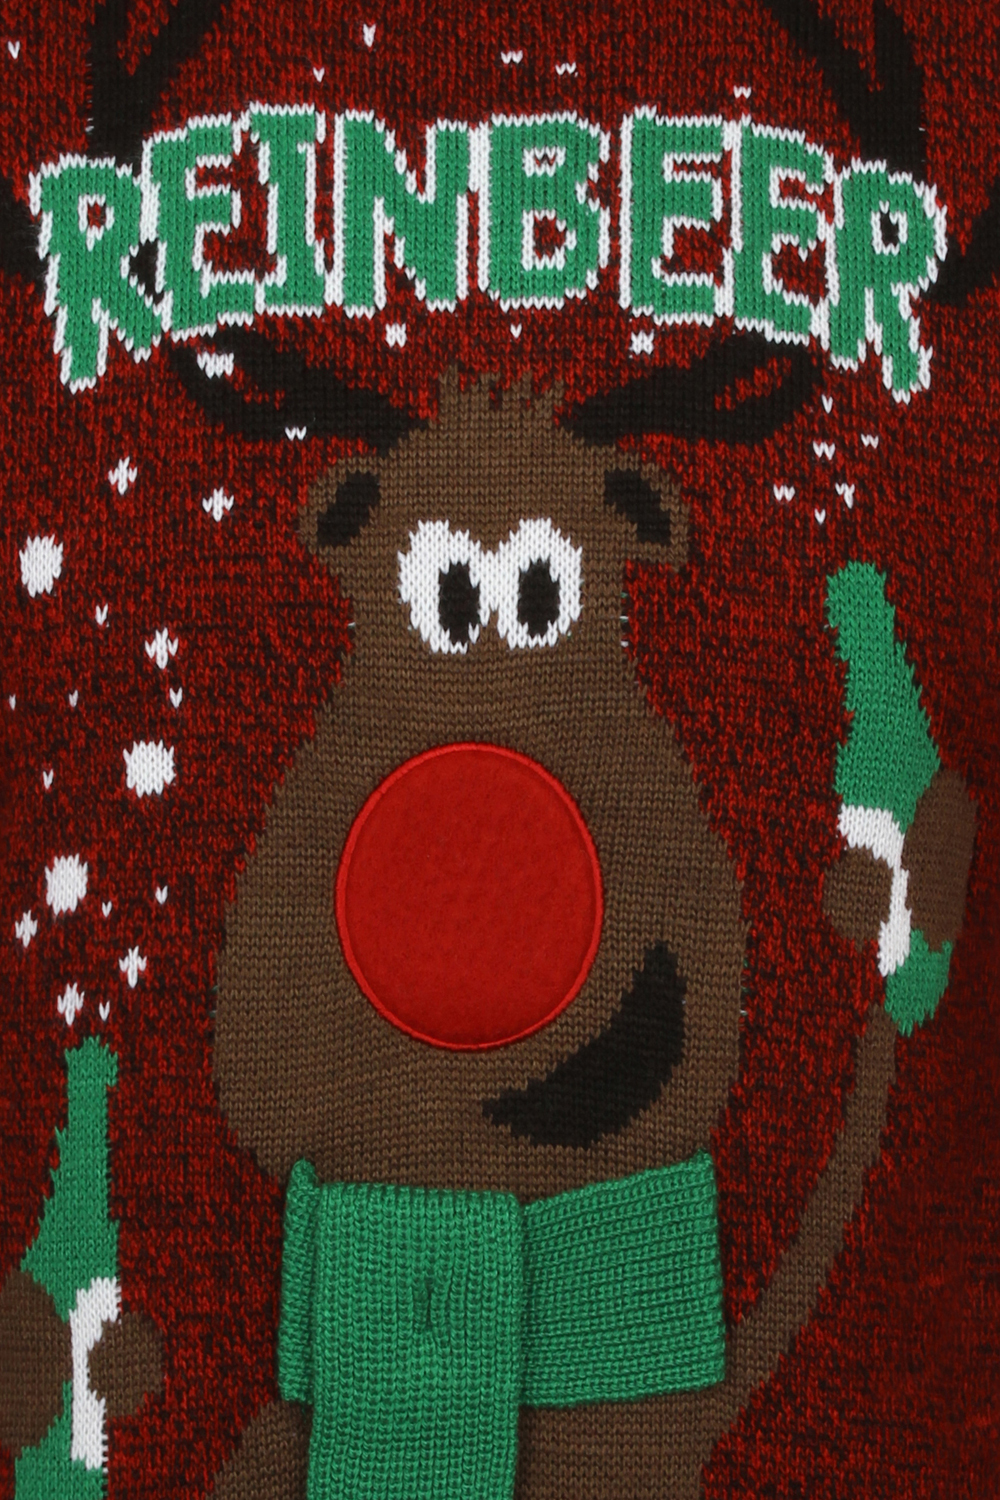 Adults Unisex Novelty Knitted Christmas Jumper New Festive Vintage Sweater Top